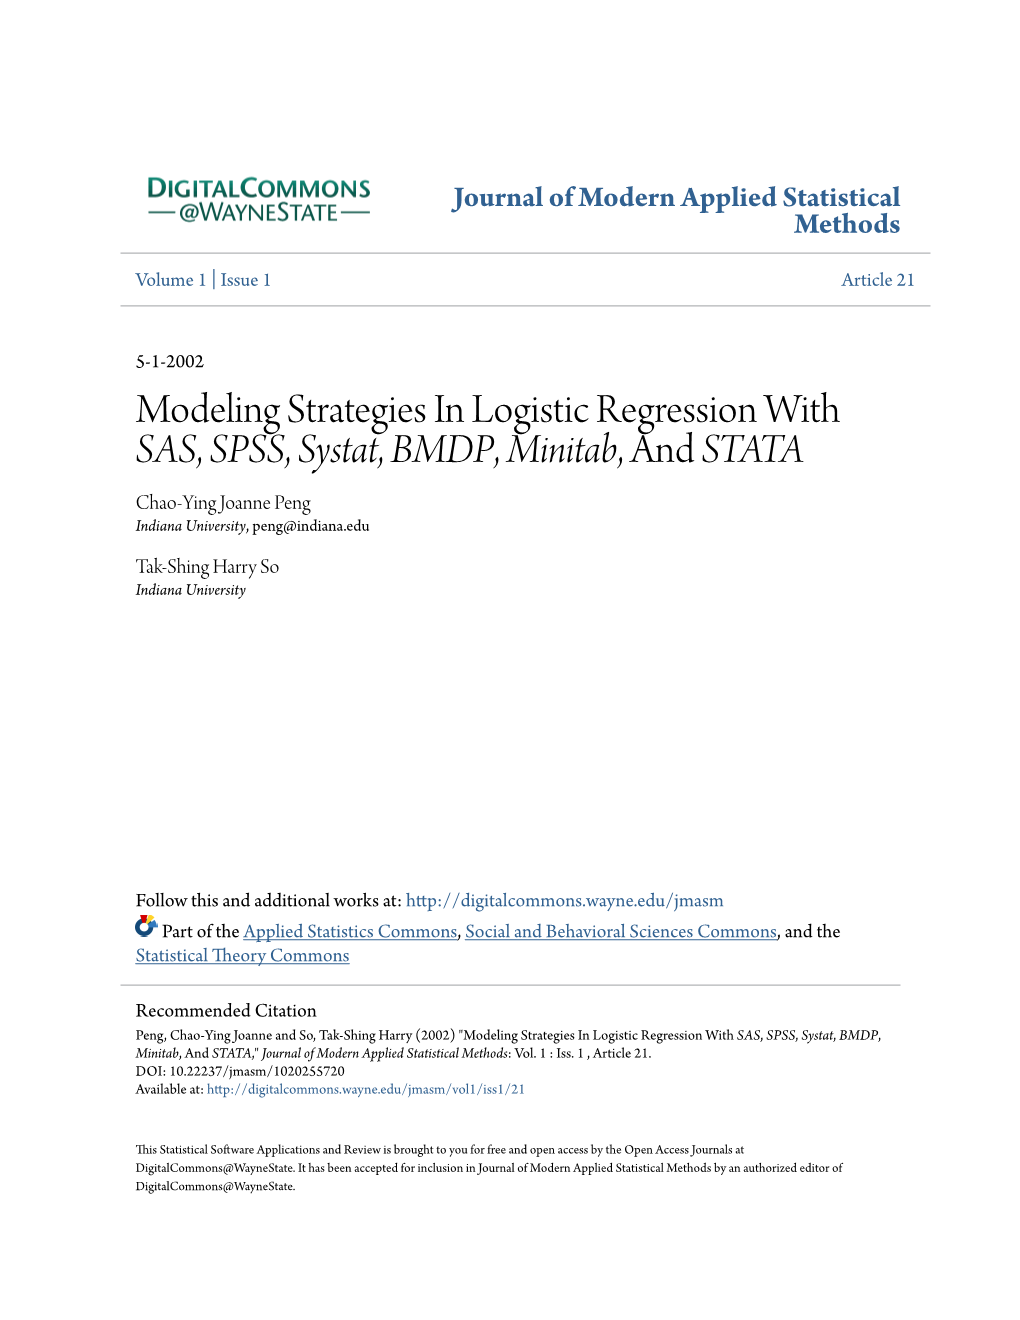 Modeling Strategies in Logistic Regression with SAS, SPSS, Systat, BMDP, Minitab, and STATA Chao-Ying Joanne Peng Indiana University, Peng@Indiana.Edu